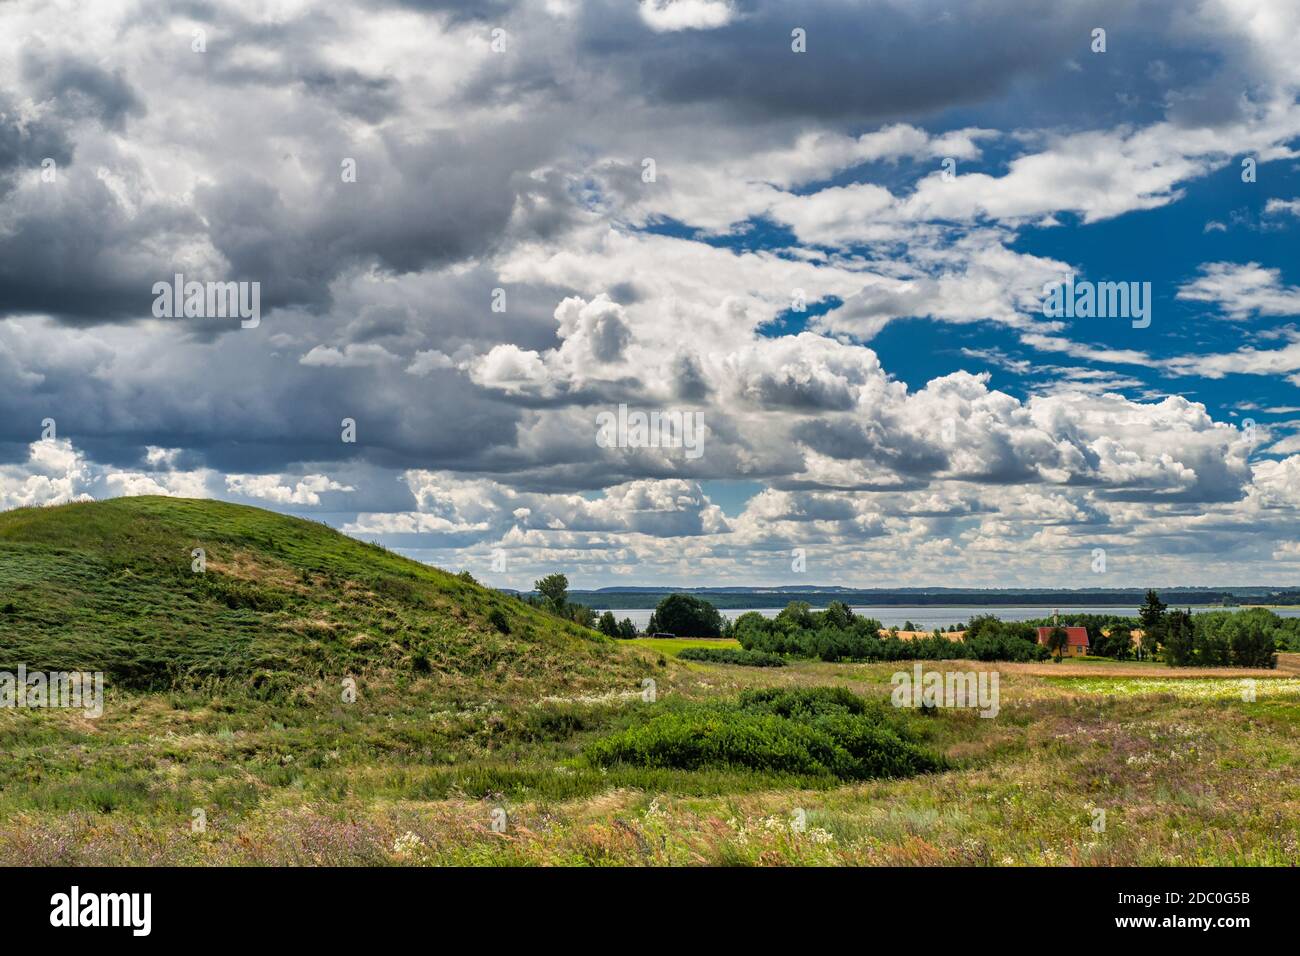 Papeciai Mound Opens a Magnificent View of The Great Lakes of Dzukija Region. Stock Photo